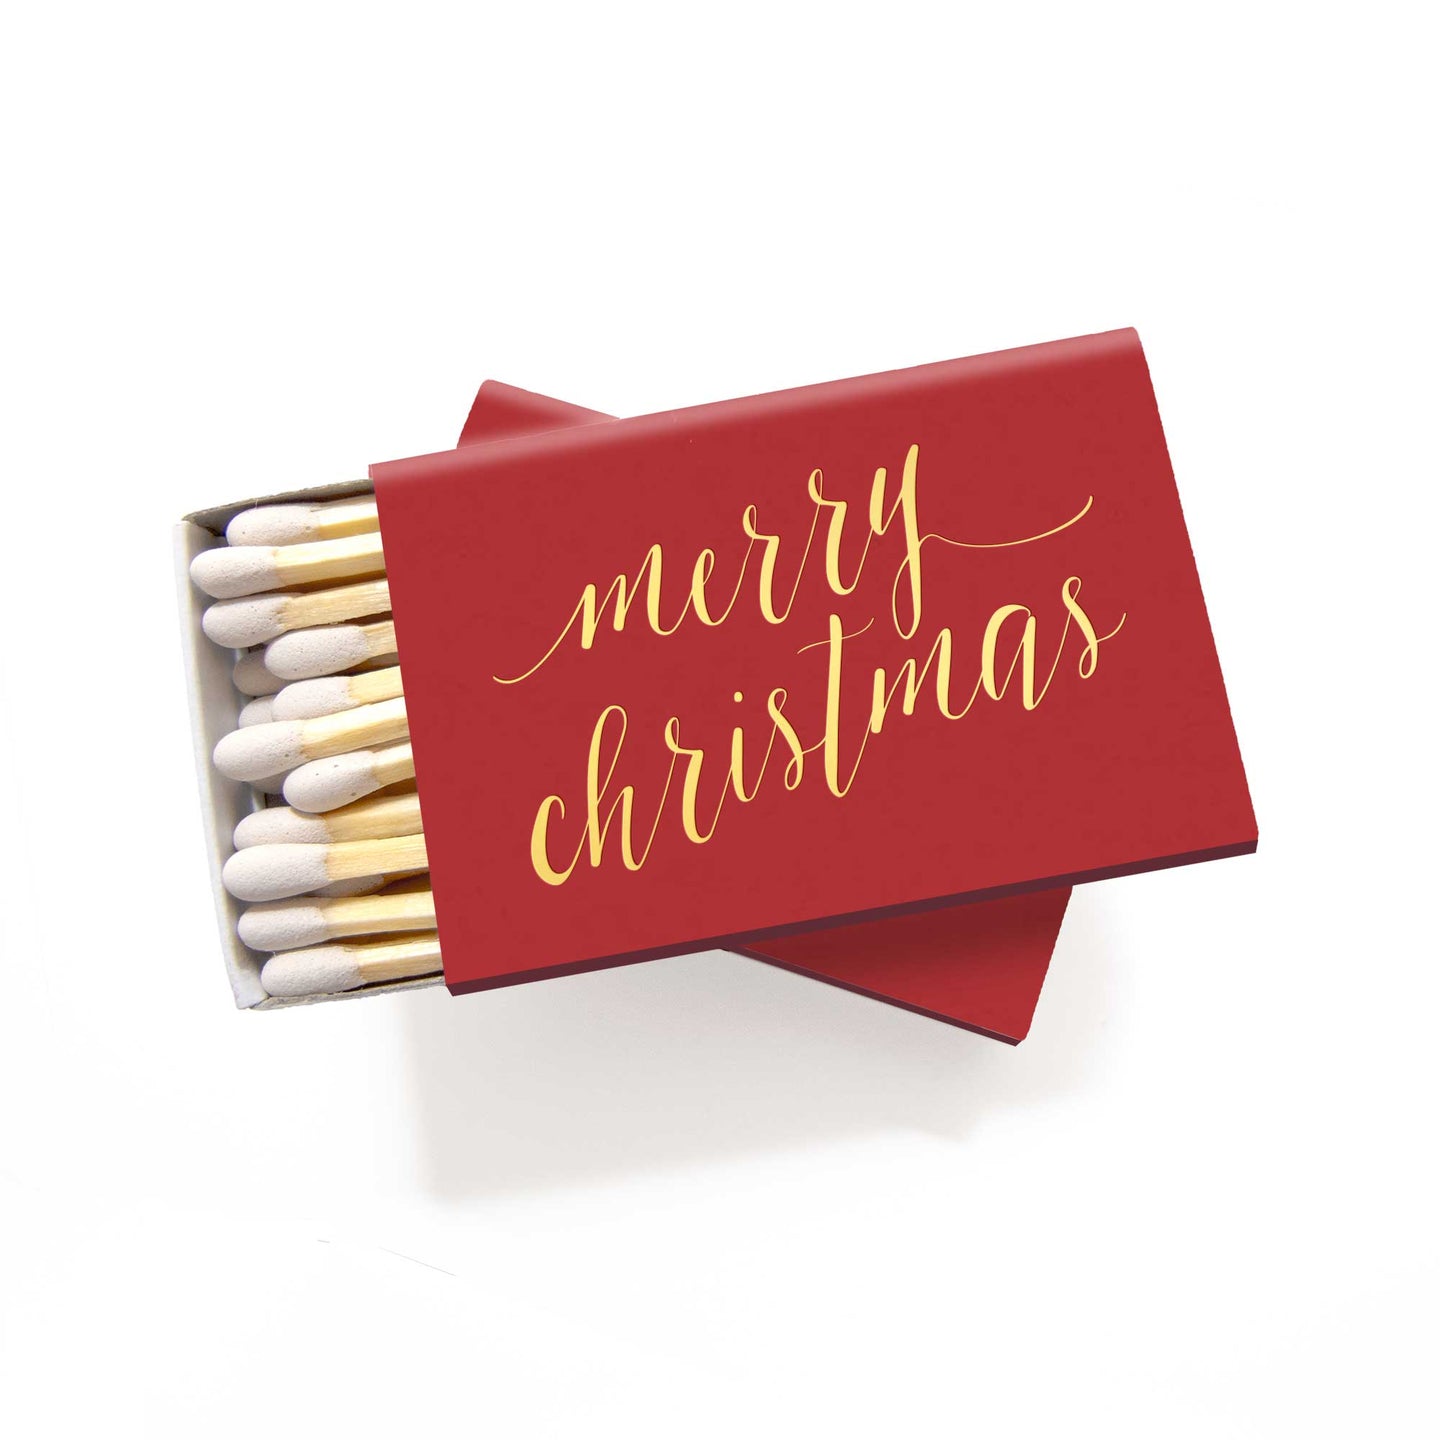 Merry Christmas Matches in Red and Gold